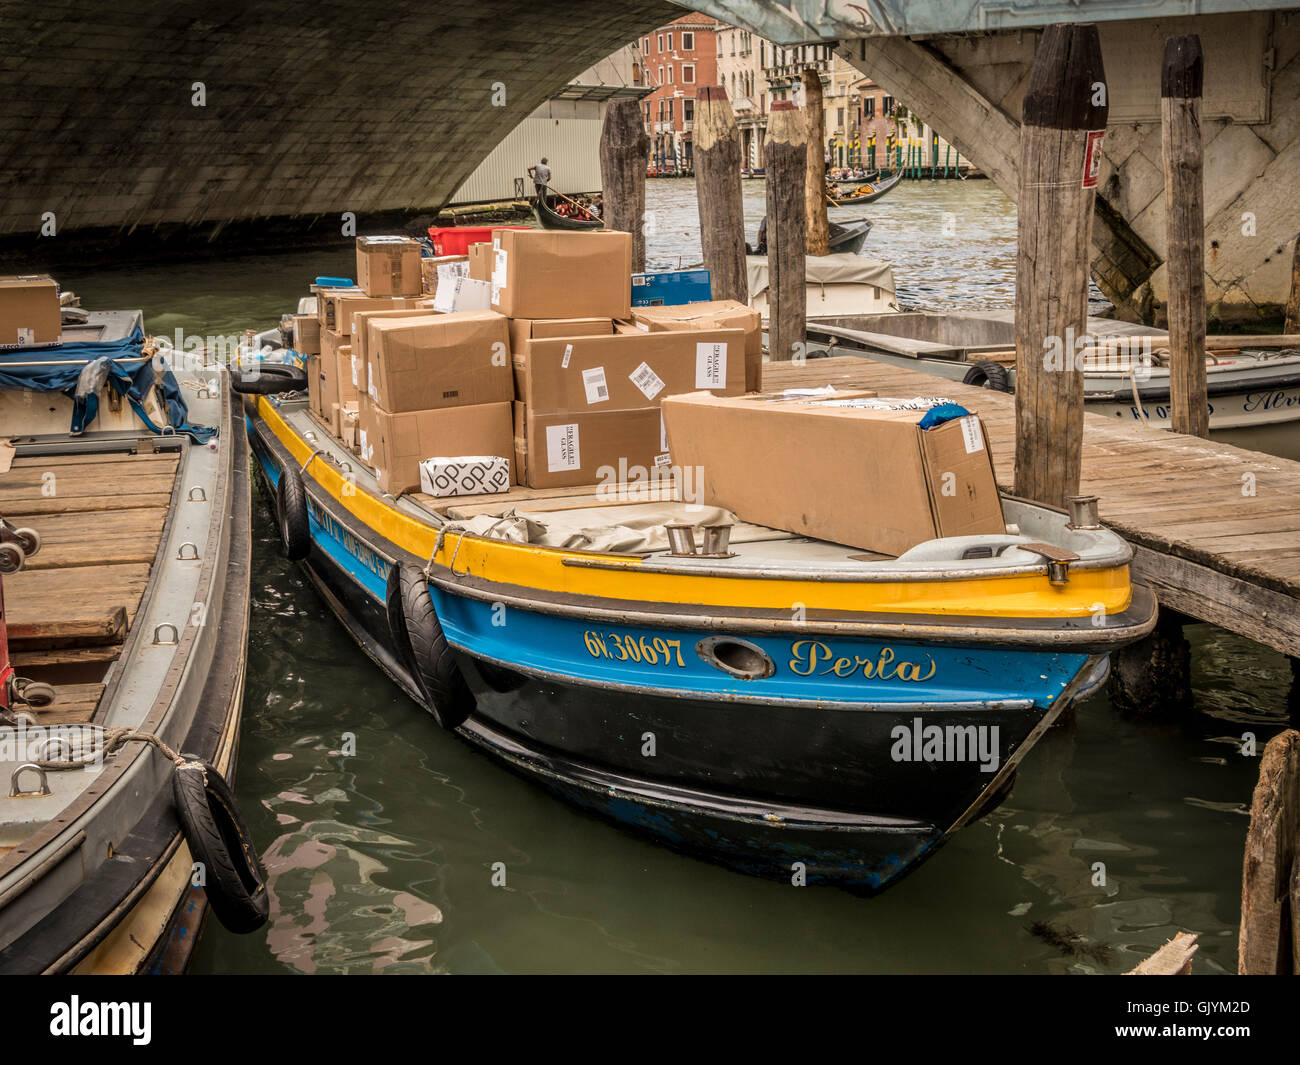 Delivery boat laden with parcels moored in a canal in Venice, Italy. Stock Photo